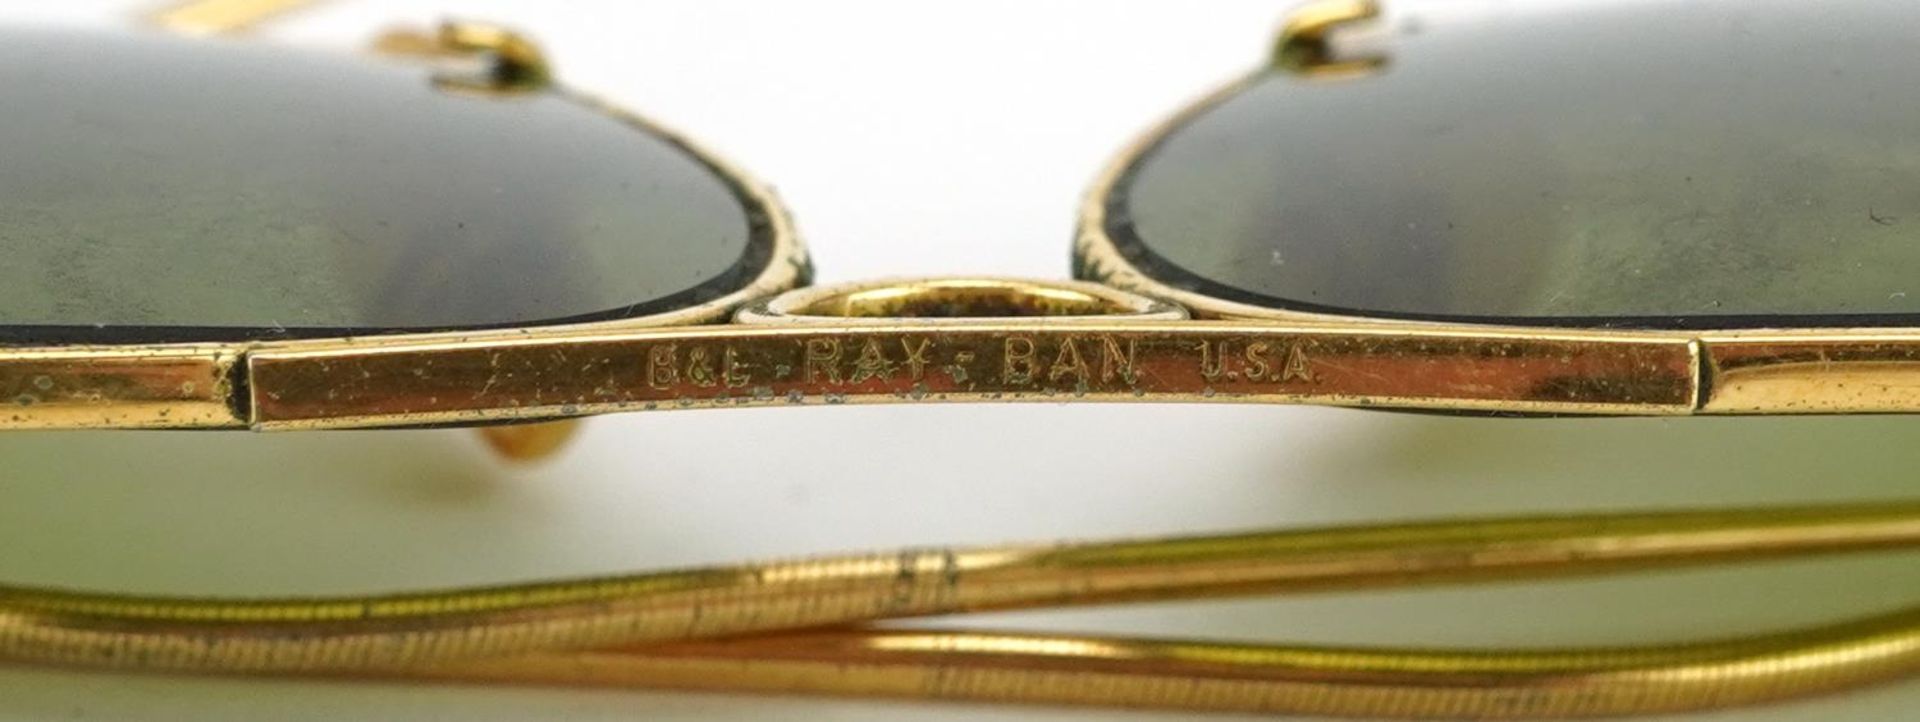 Pair of vintage Bausch & Lomb Ray-Ban aviator sunglasses : For further information on this lot - Image 3 of 3